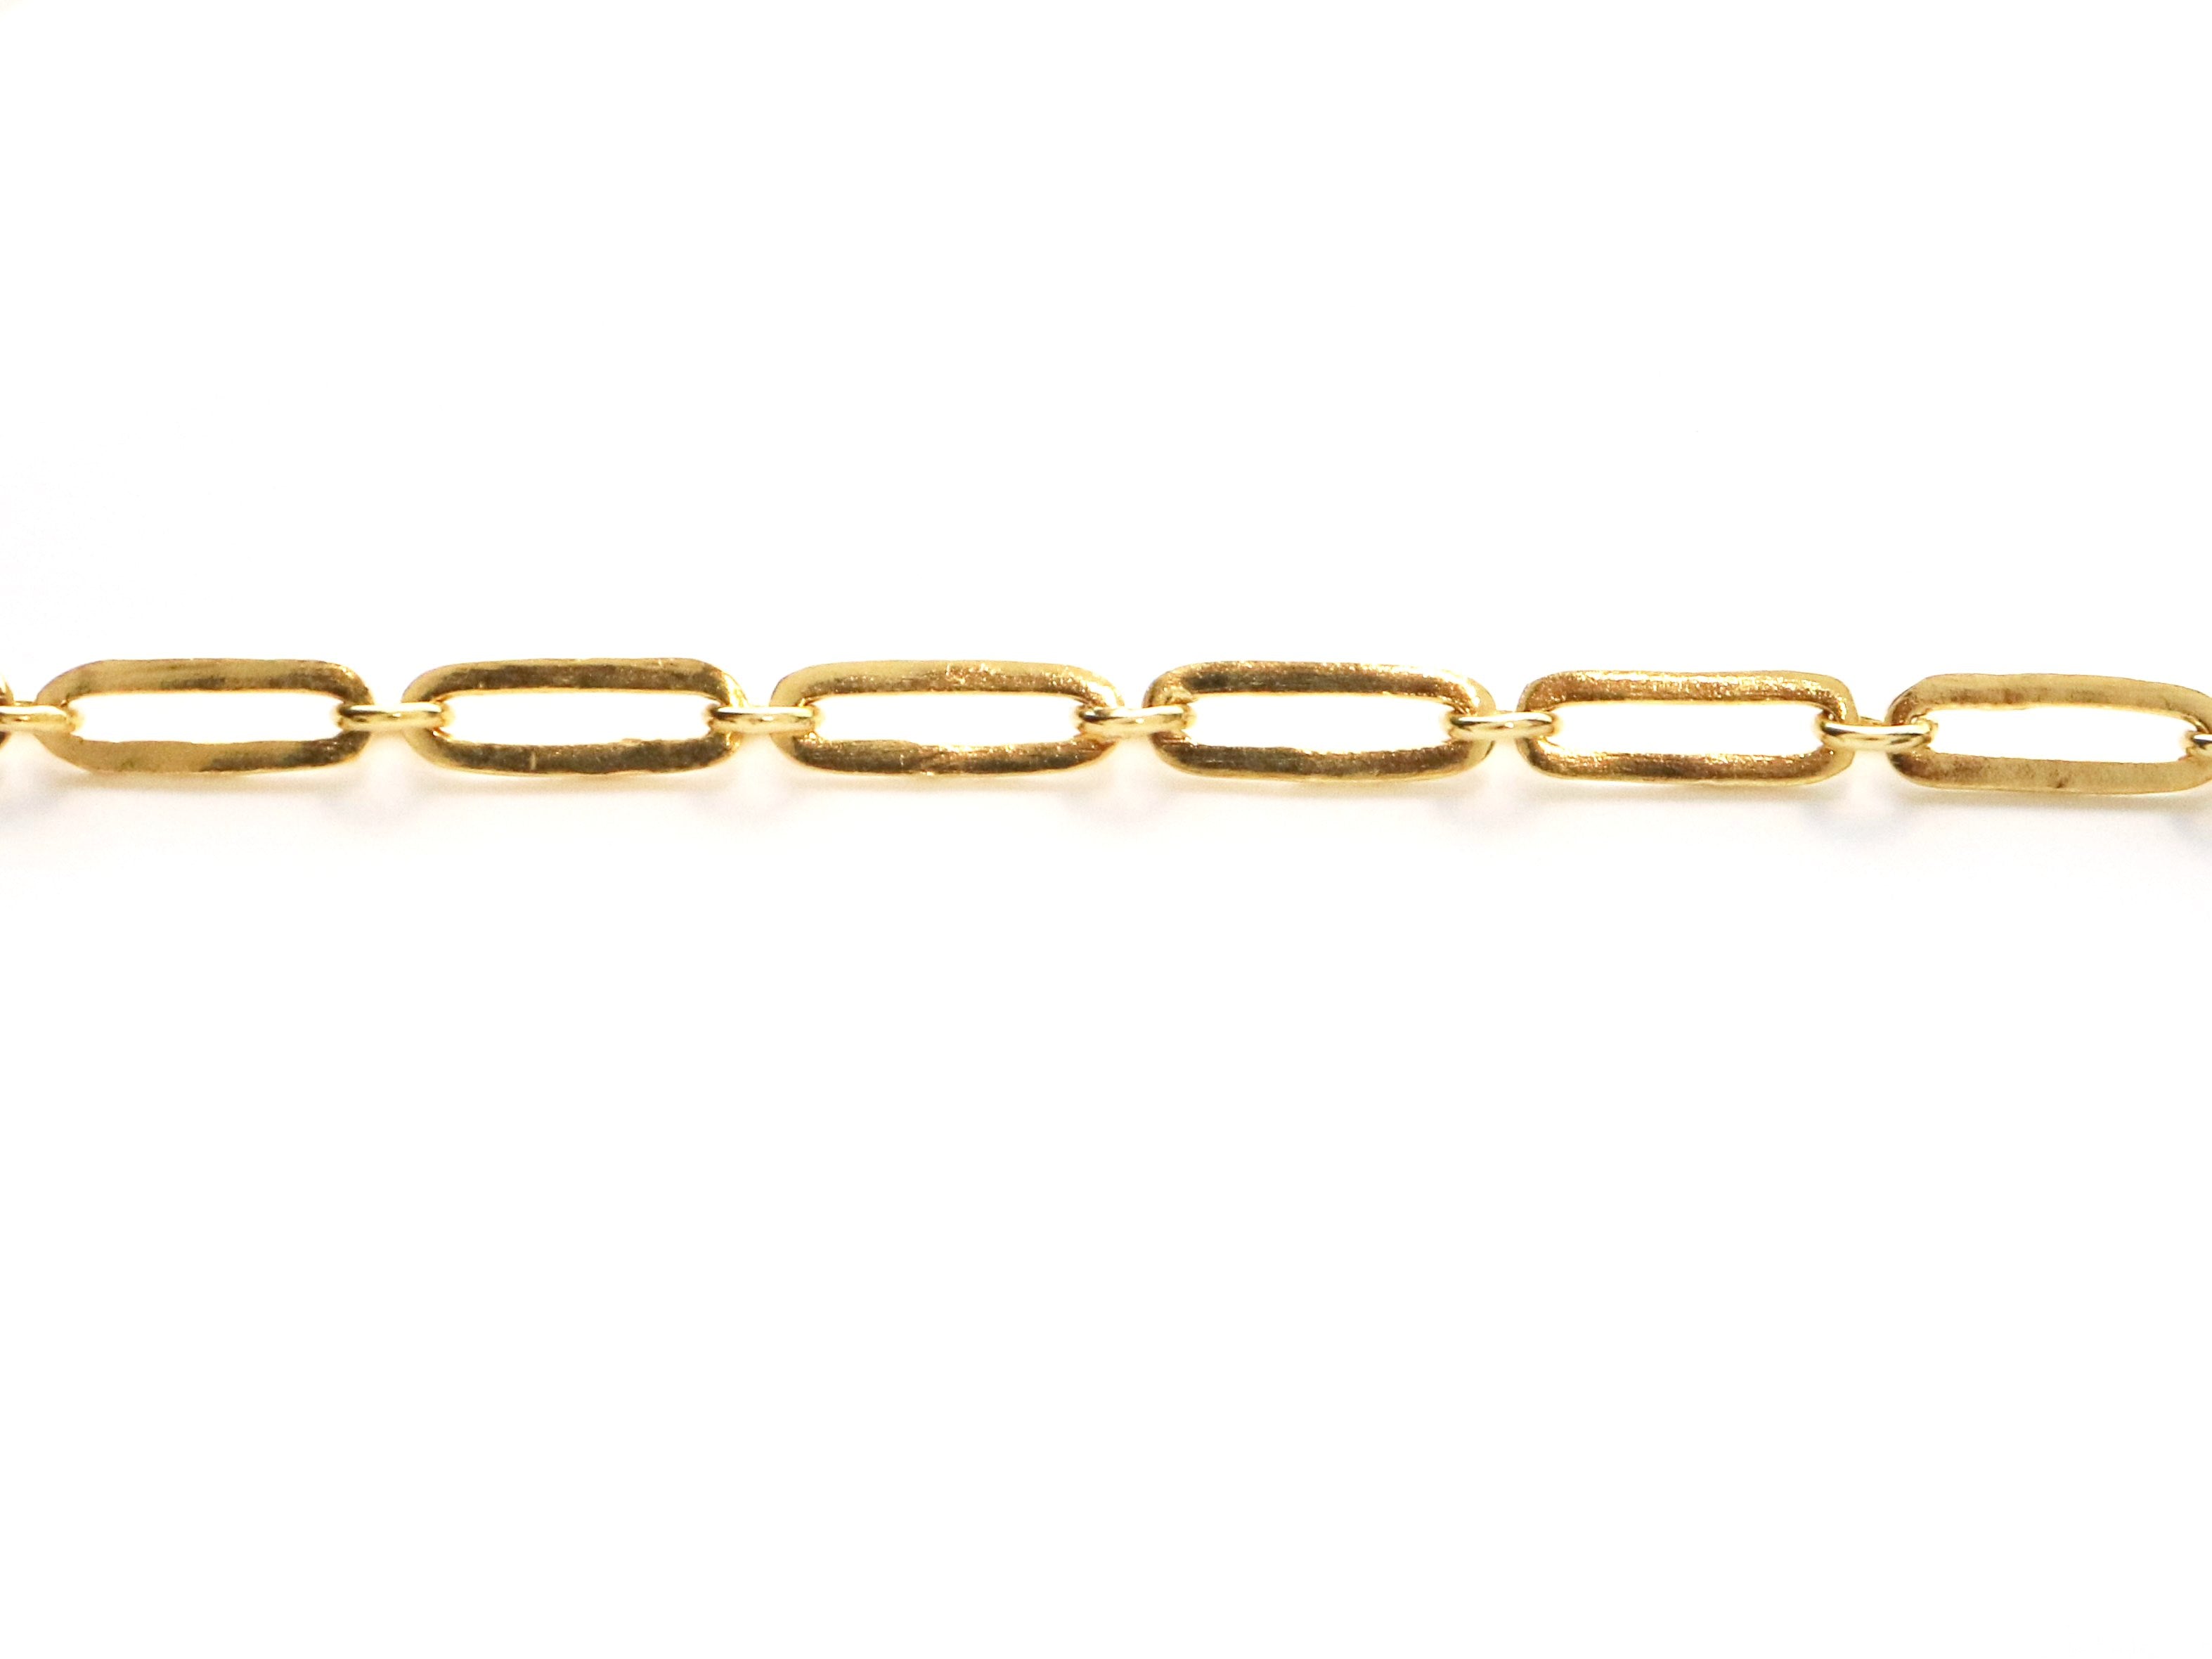 Sterling Silver Vermeil Paperclip chain w/ring, w/ Micron Gold, x 15  mm, (SS-182-LGR) Beadspoint